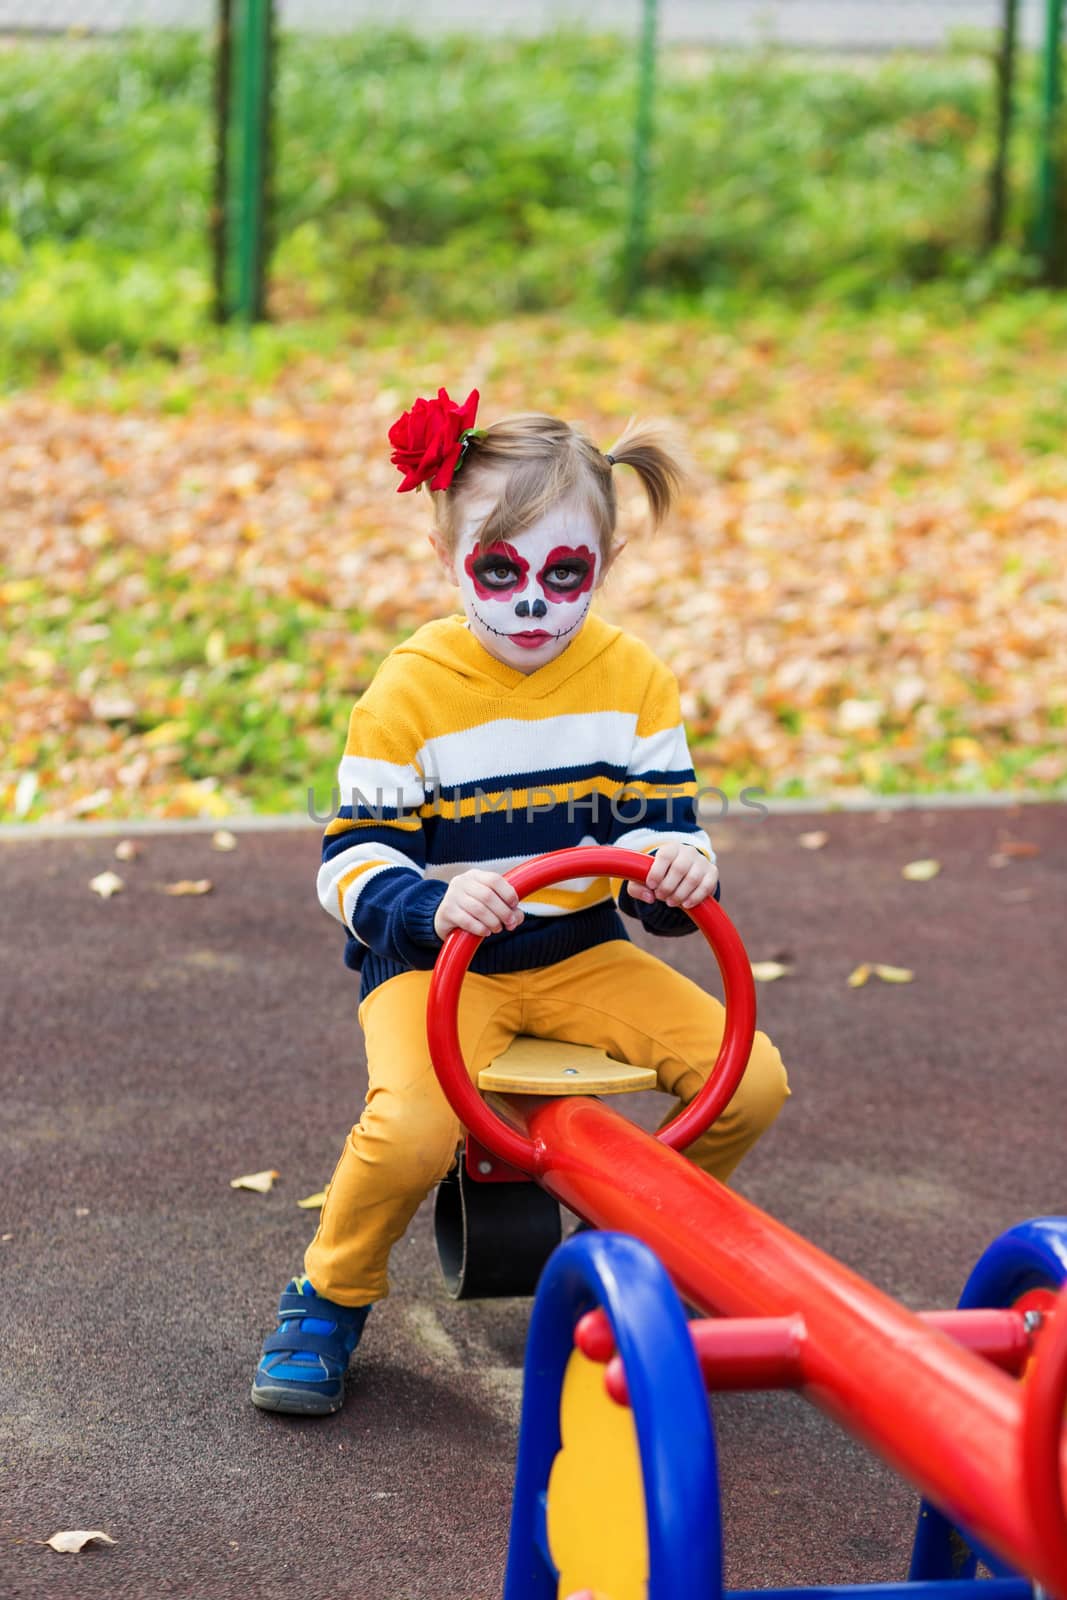 A little girl rides on a swing in the playground, on Day of the Dead. by galinasharapova